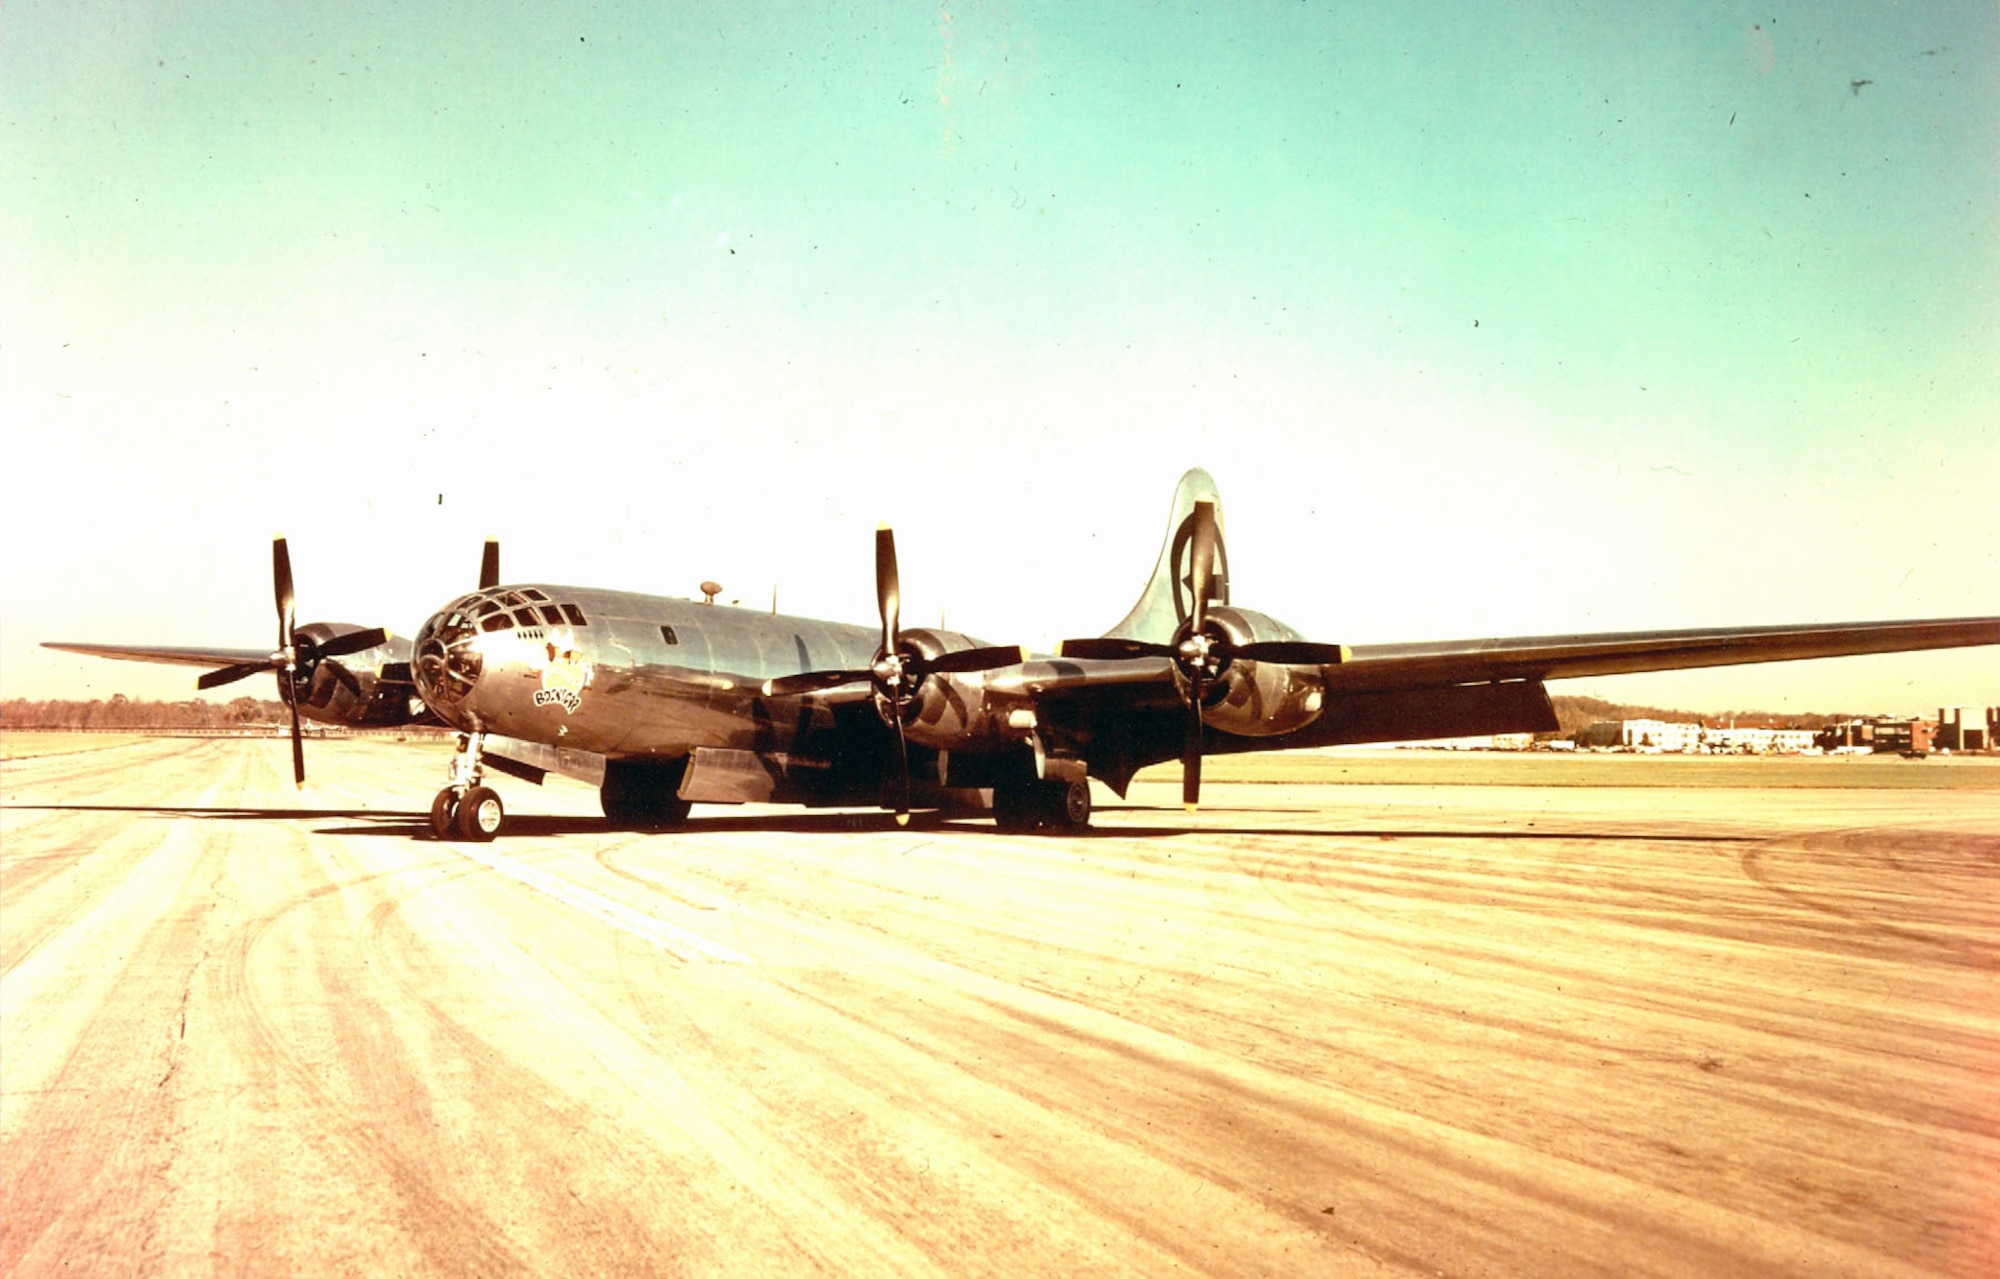 DAYTON, Ohio -- Boeing B-29 Superfortress "Bockscar" at the National Museum of the United States Air Force. (U.S. Air Force photo)